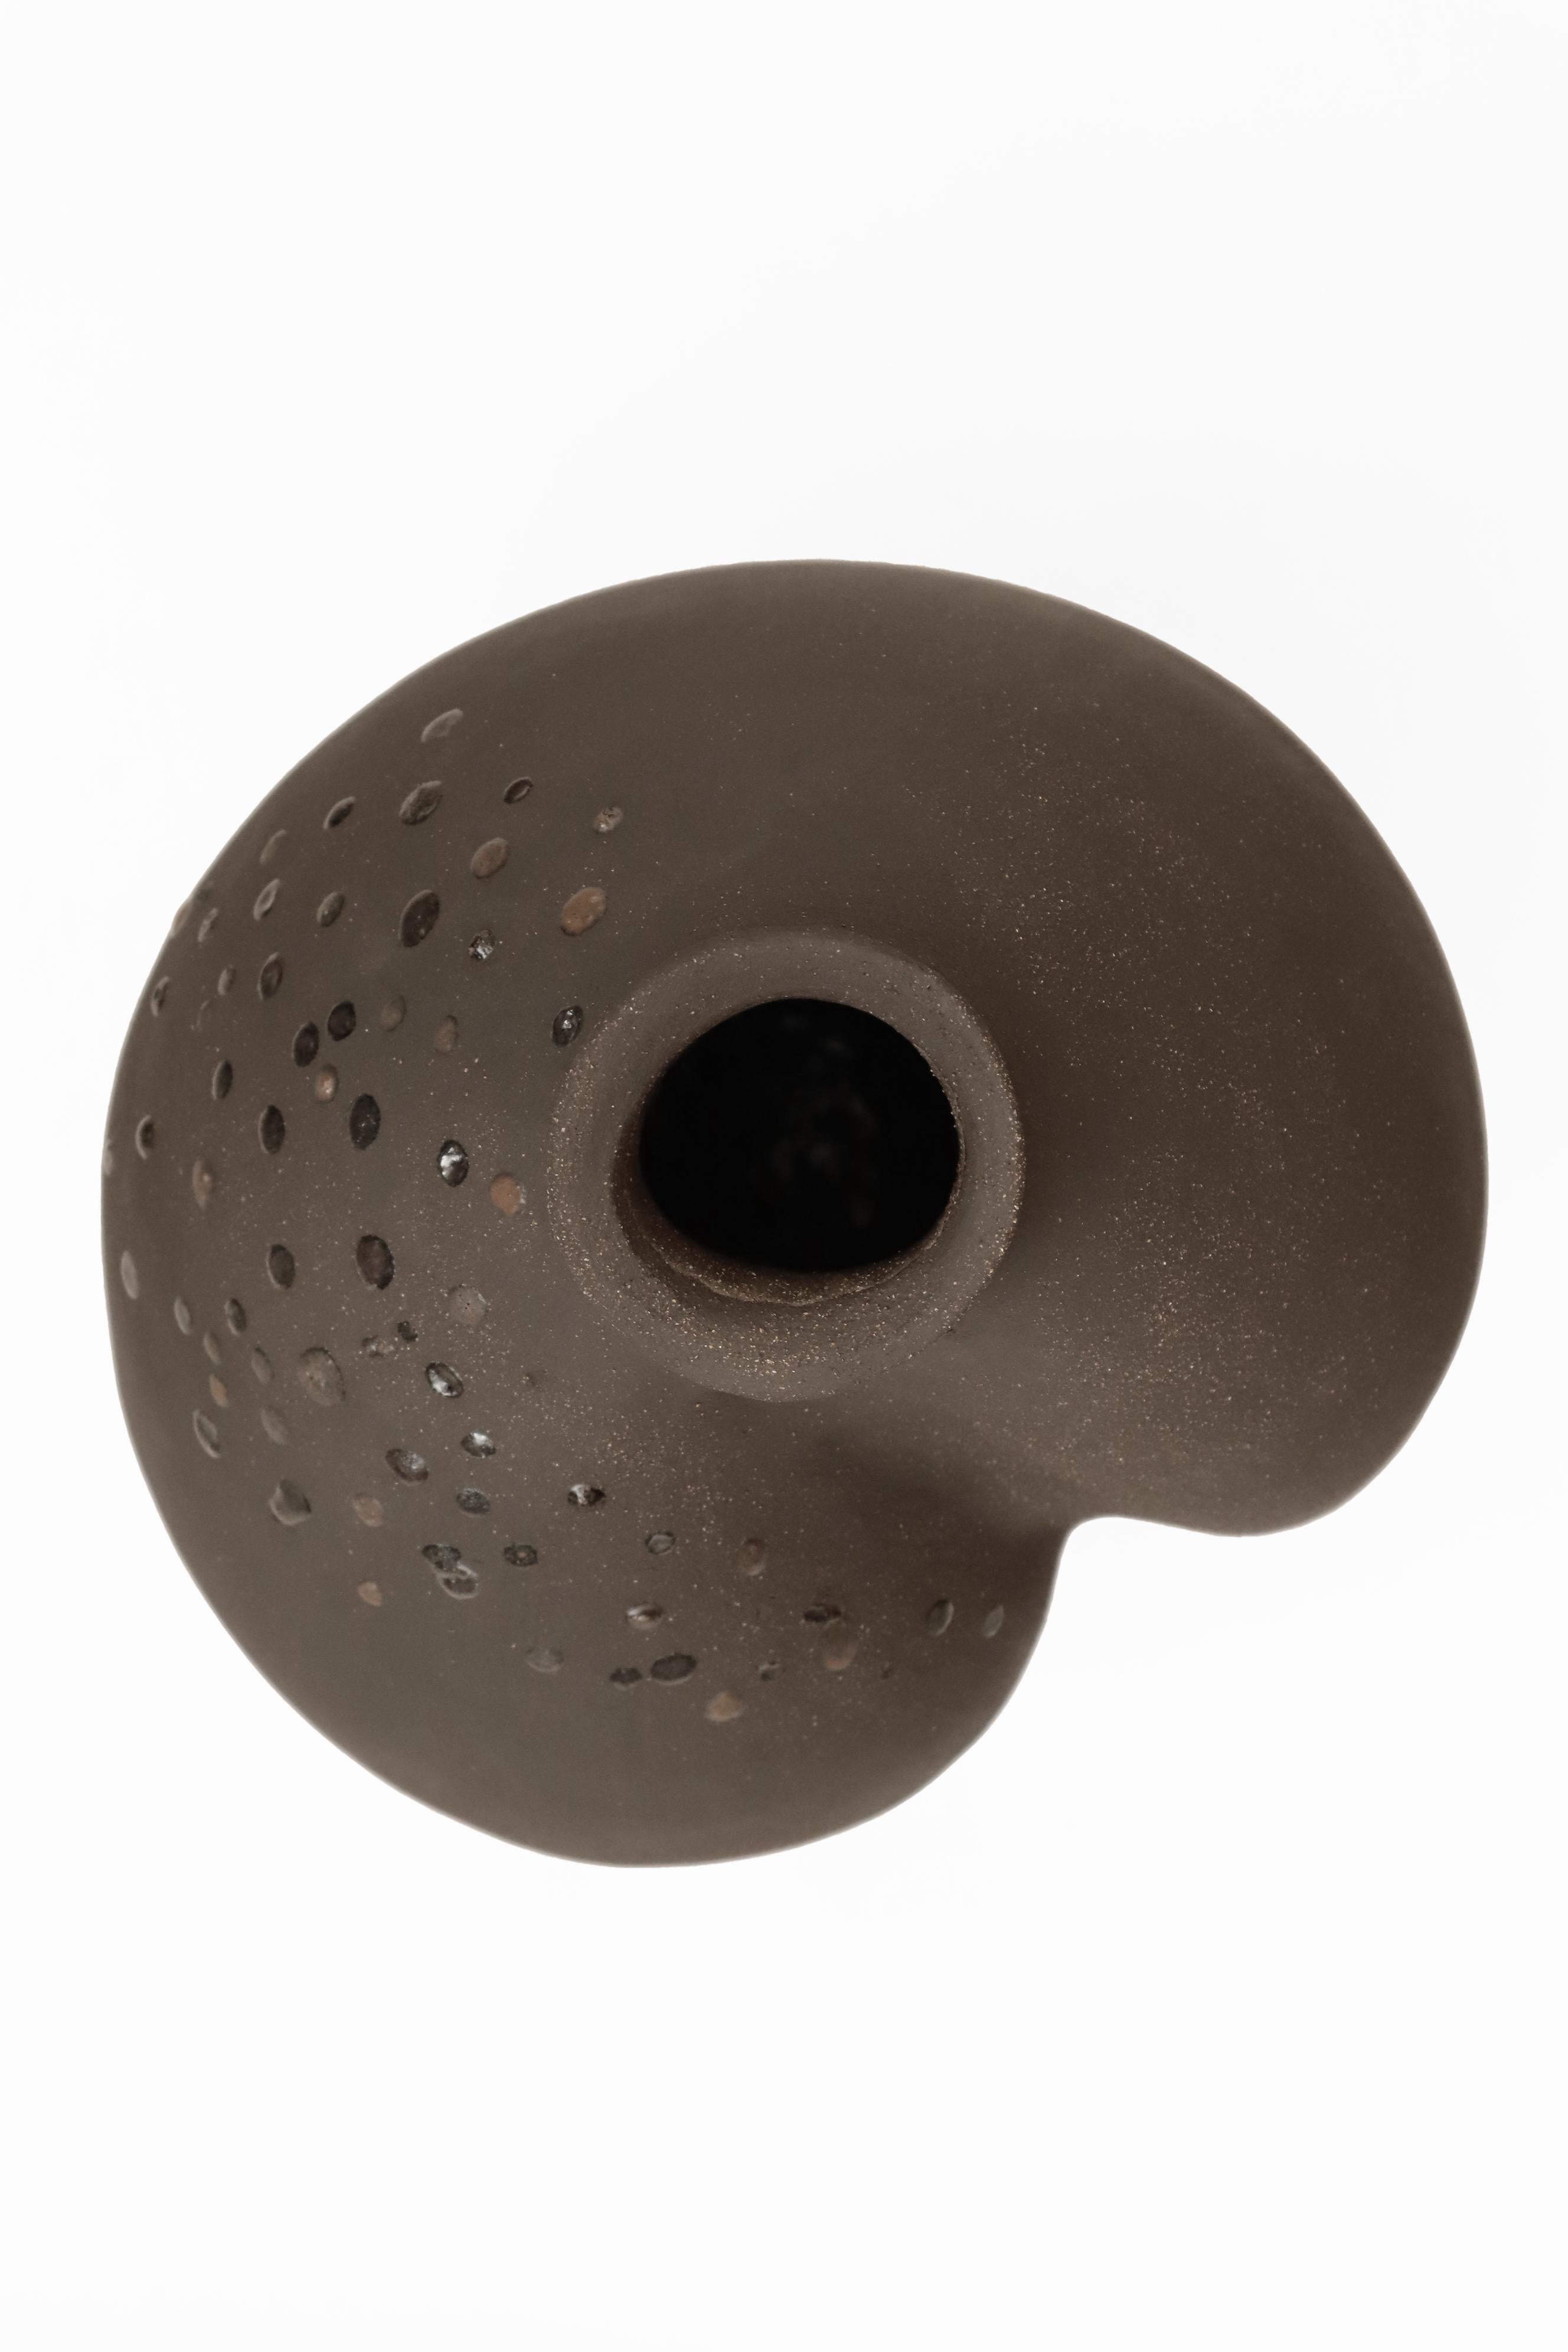 Stomata 12 vase by Anna Karountzou
Dimensions: W 25 x D 23 x H 36 cm
Materials: Black stoneware clay, clear glaze inside, decorated outside with volcano rocks collected from Santorini, fired at 1240

Born and based in Athens, Greece, with a